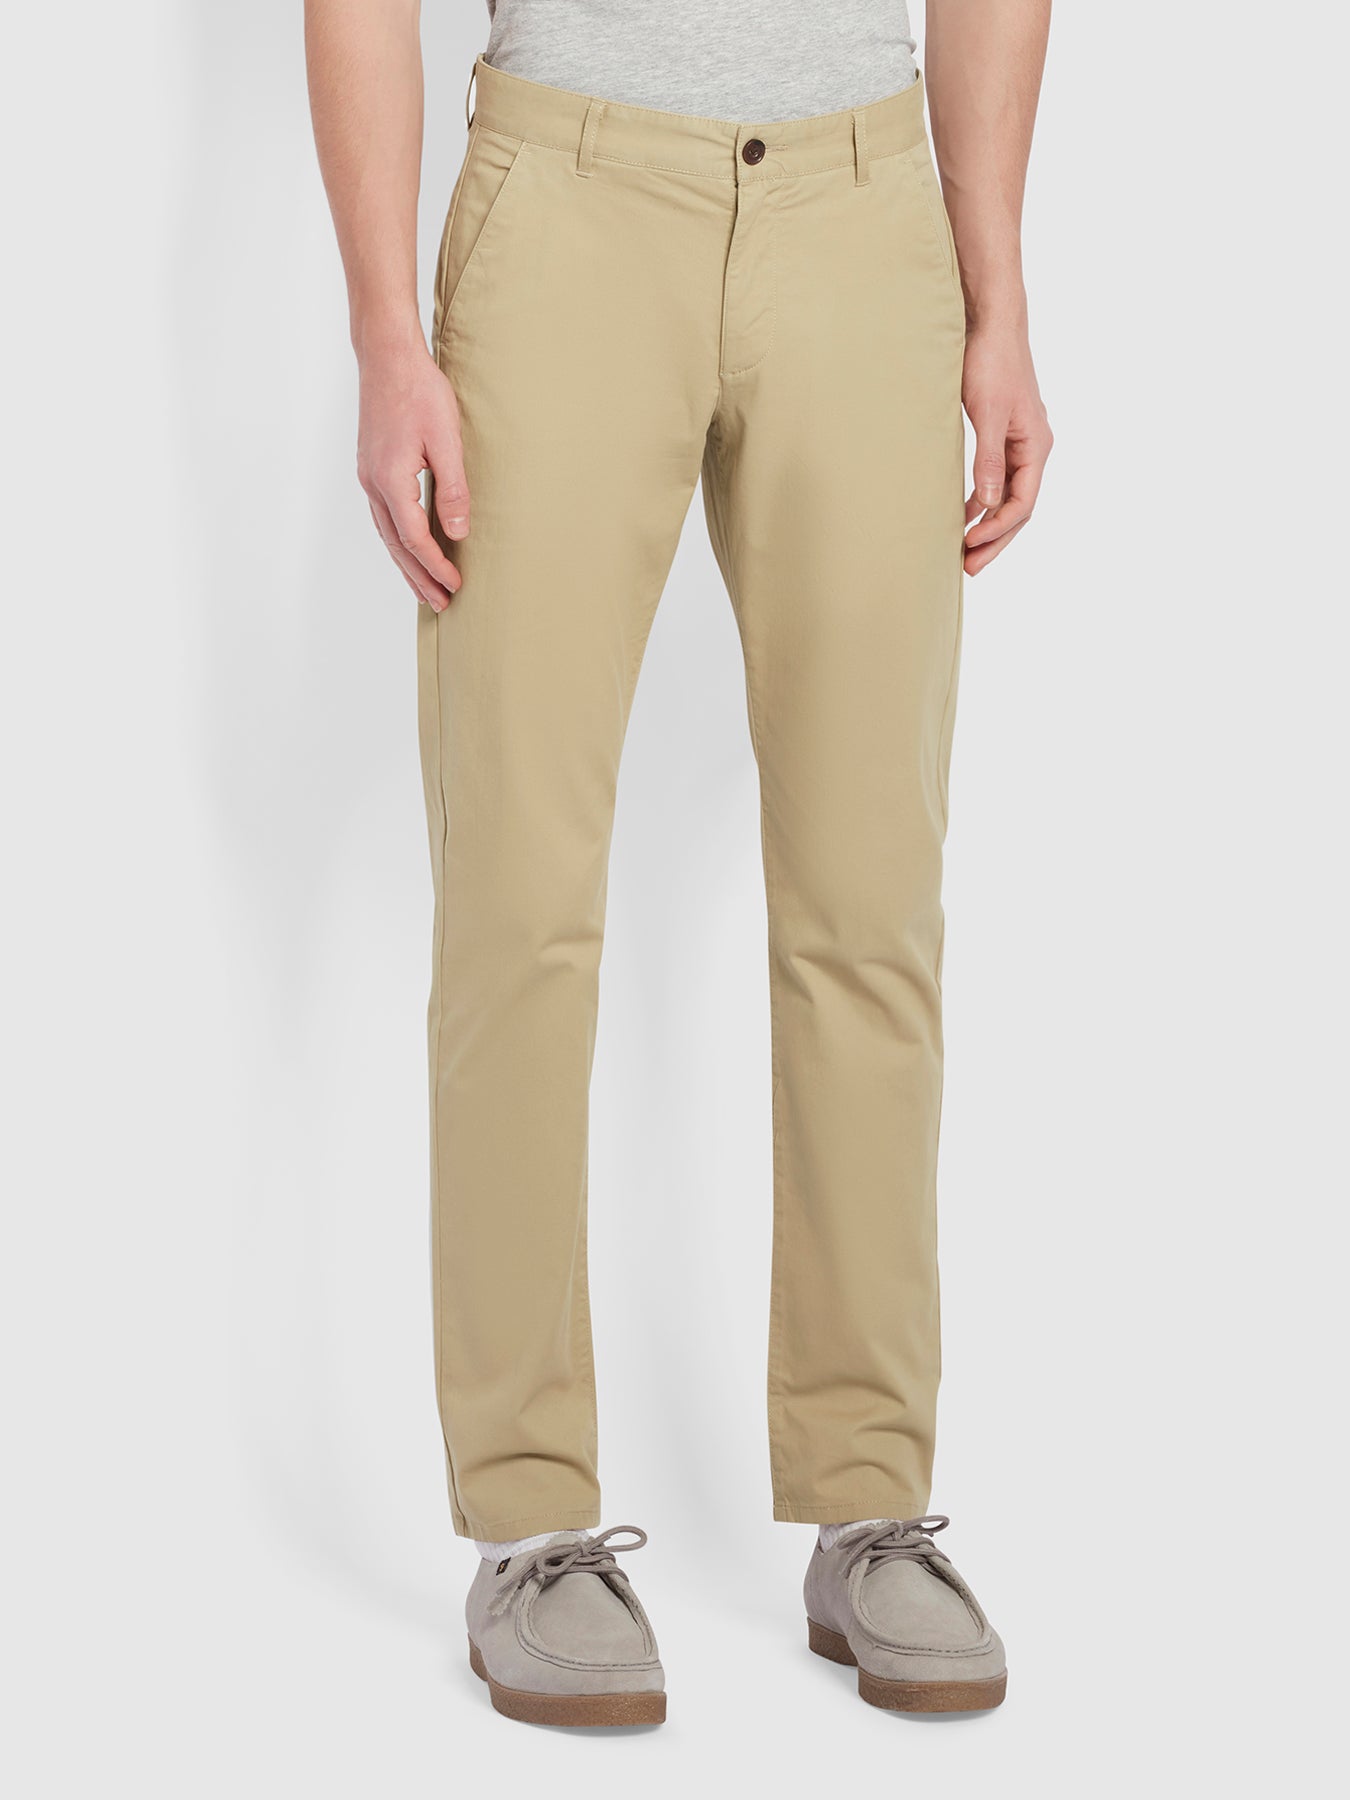 View Elm Regular Fit Organic Cotton Twill Chinos In Light Sand information